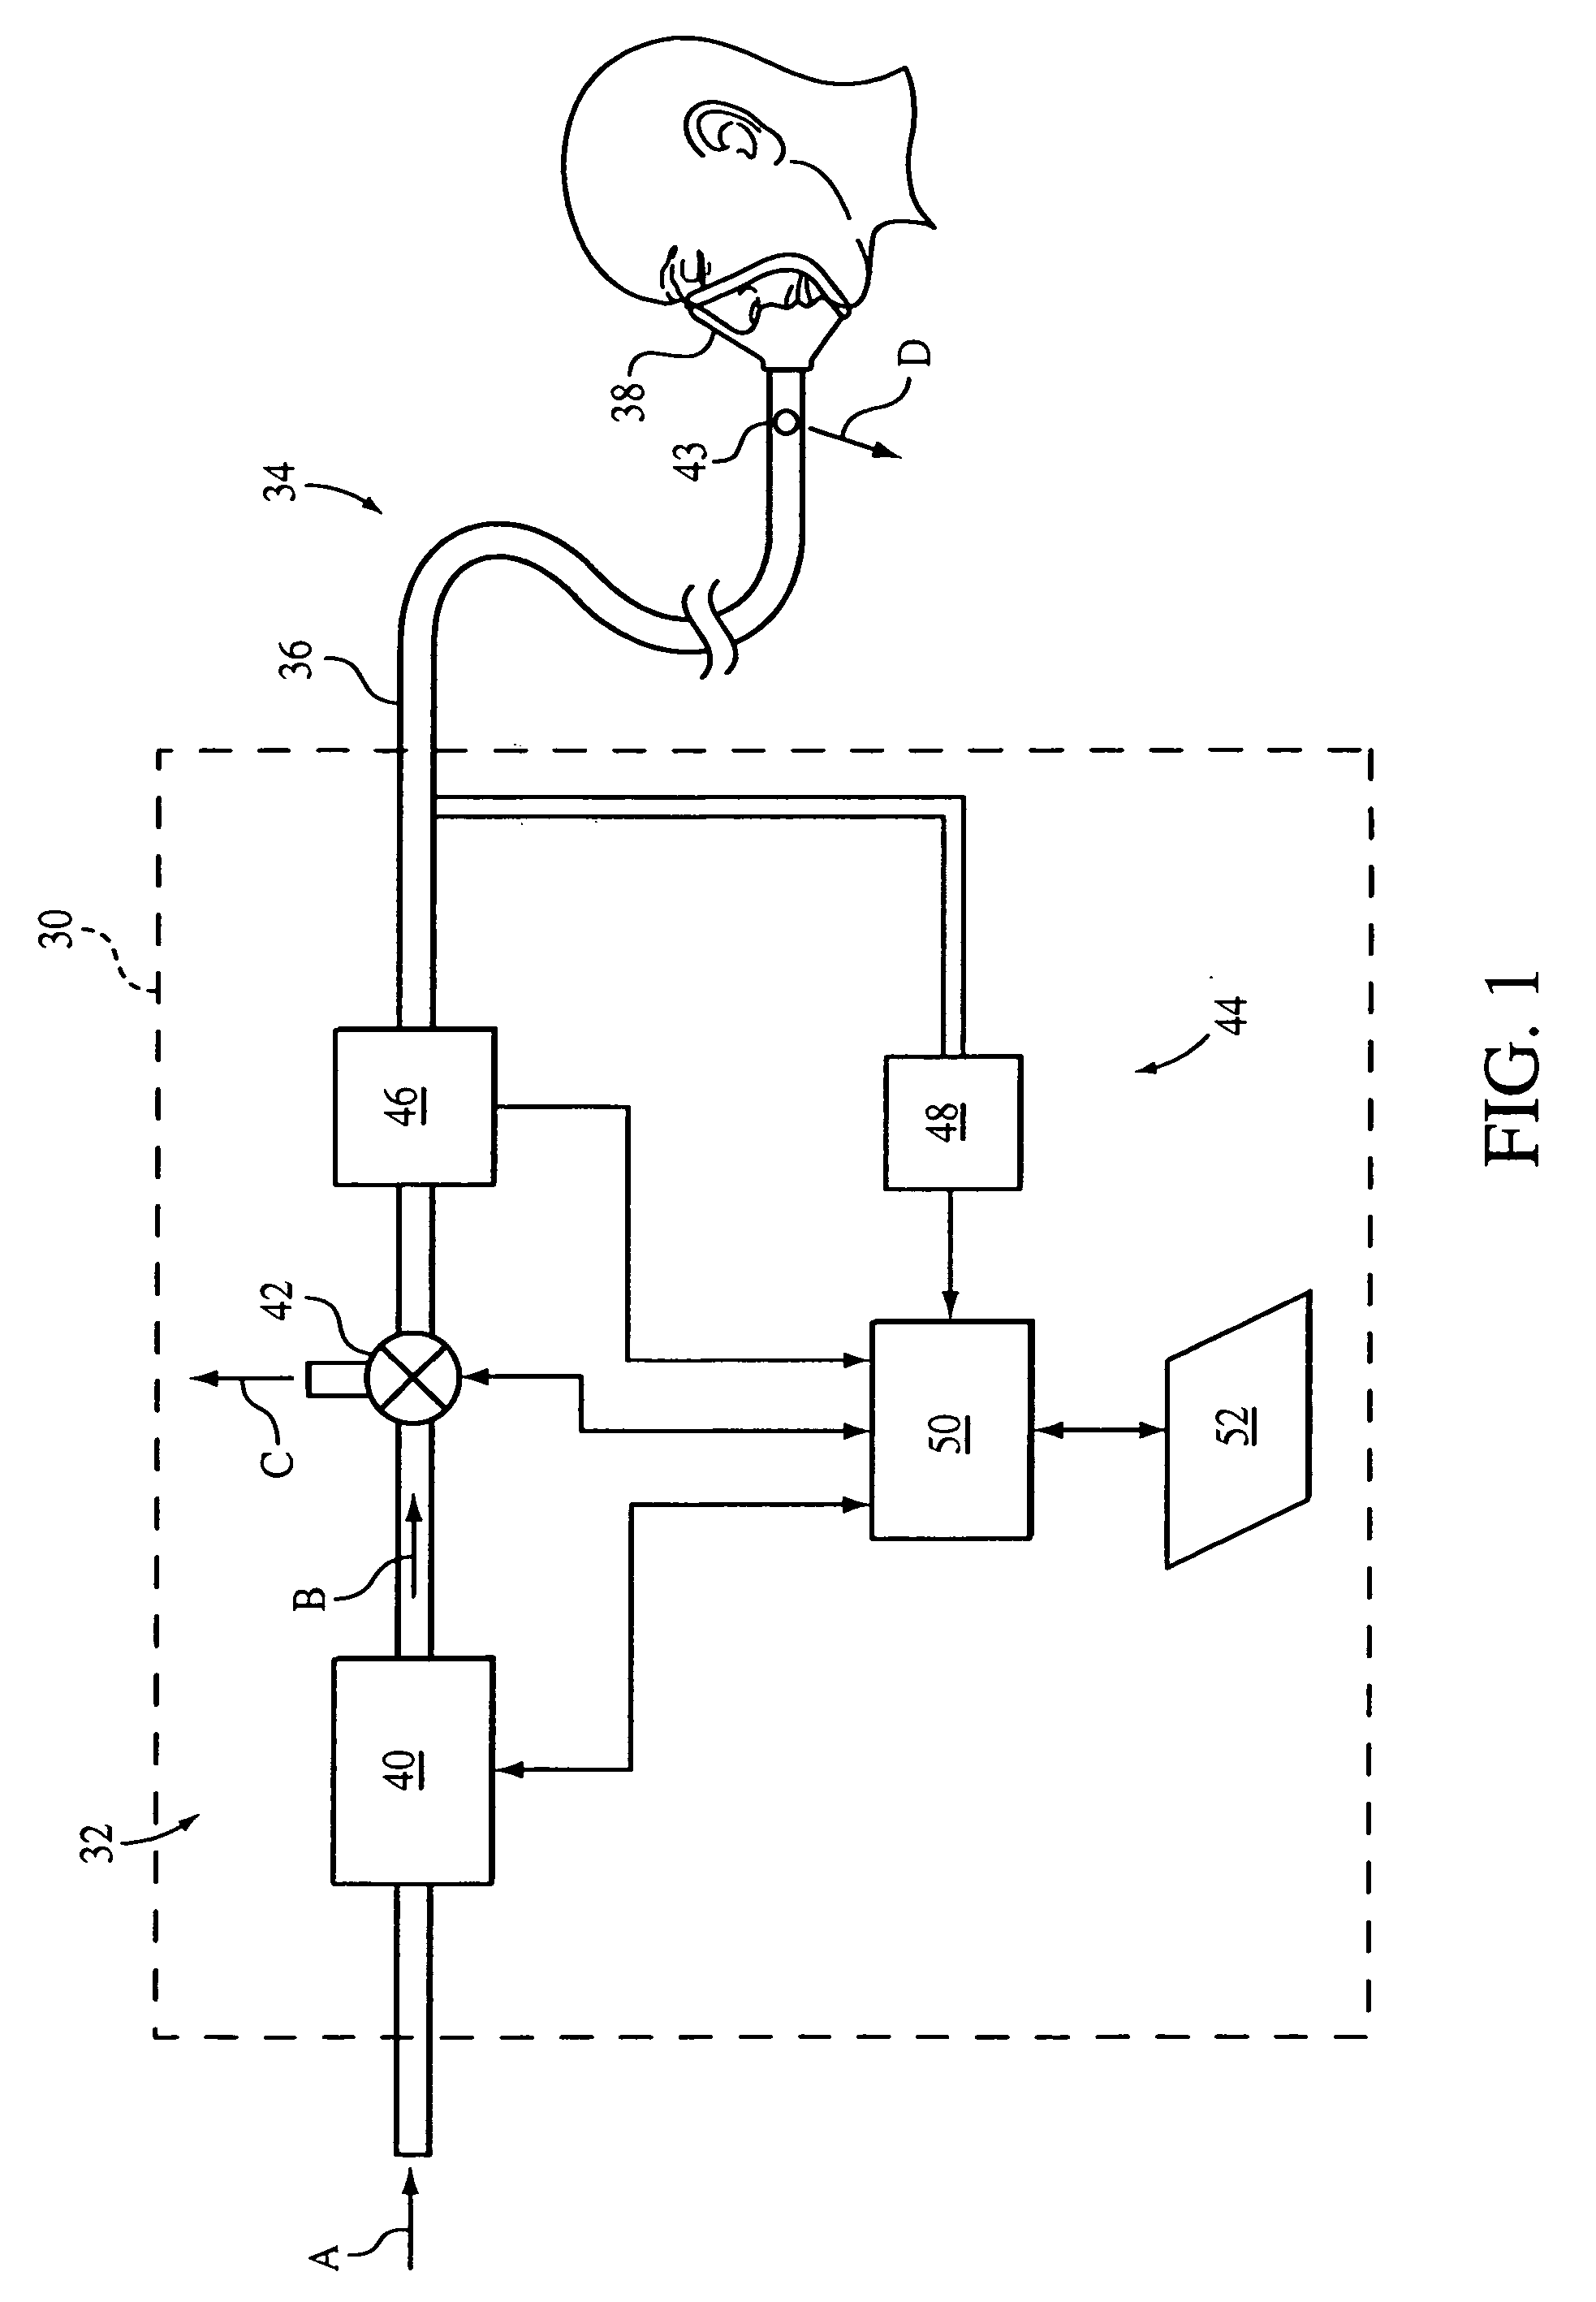 Auto-titration pressure support system and method of using same